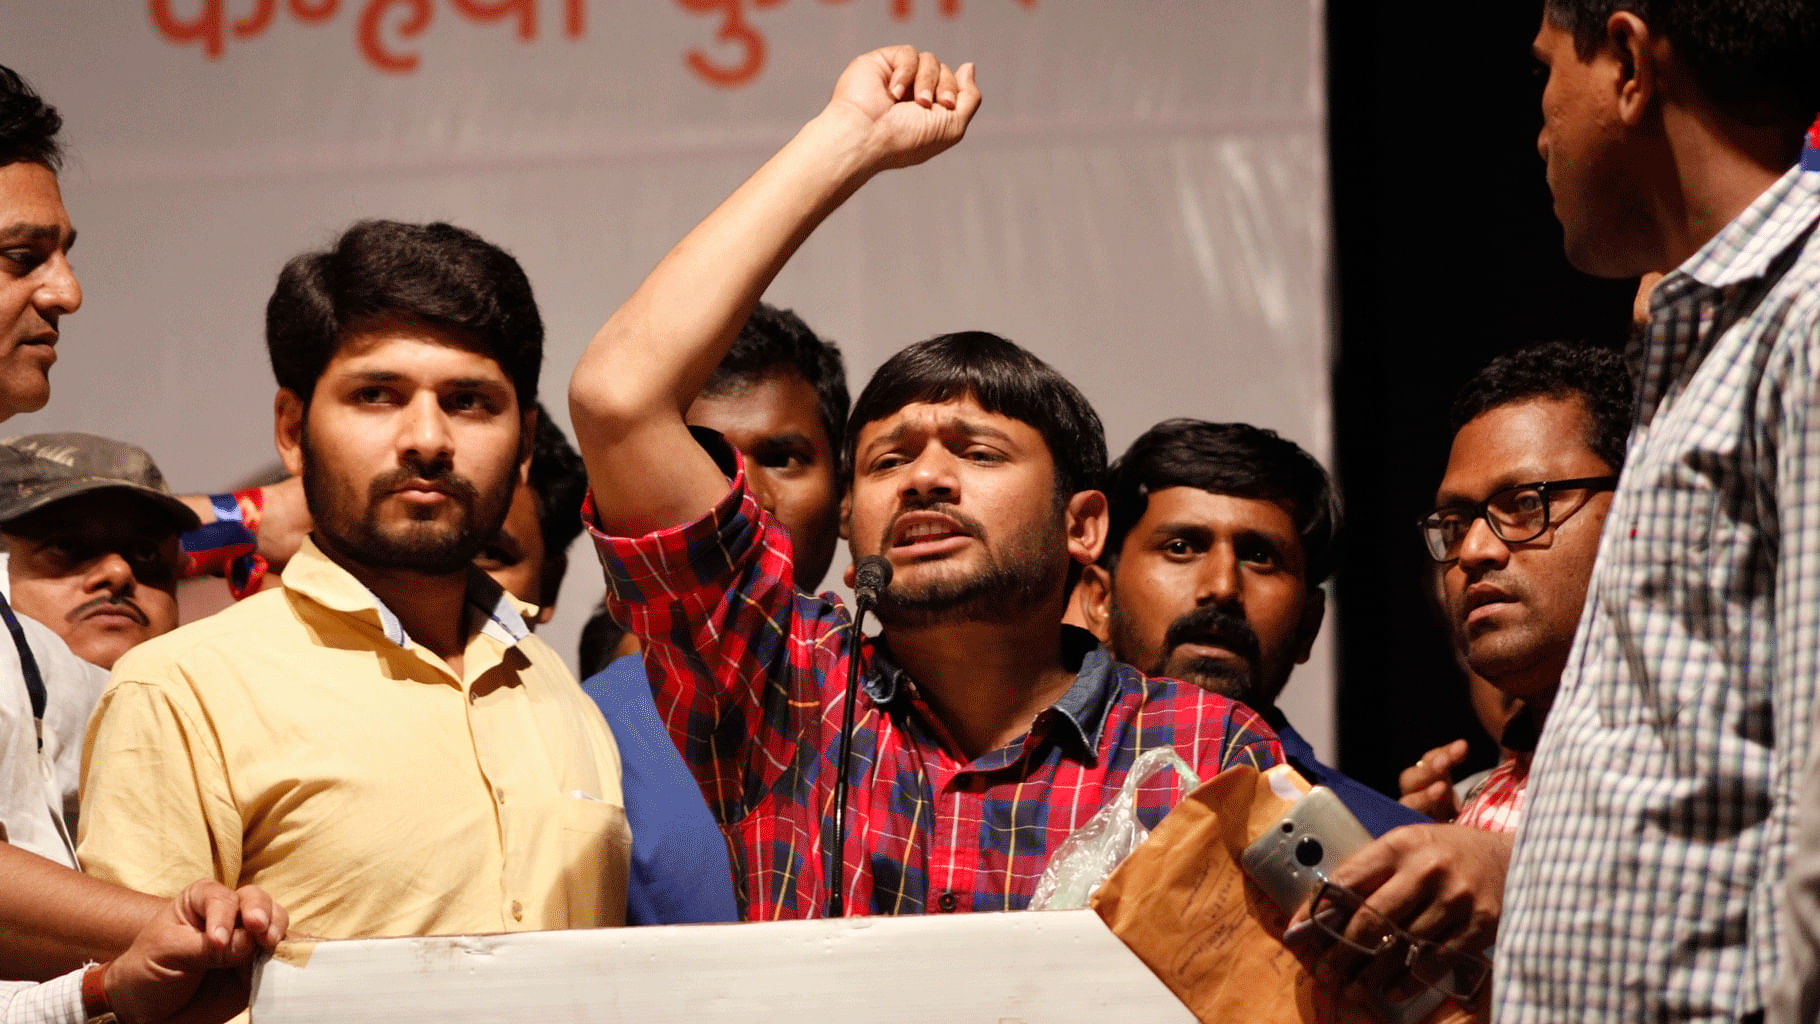 Kanhaiya Kumar addresses a gathering in Pune; he alleged that he was assaulted by a BJP supporter on his way to the meeting. (Photo: IANS)